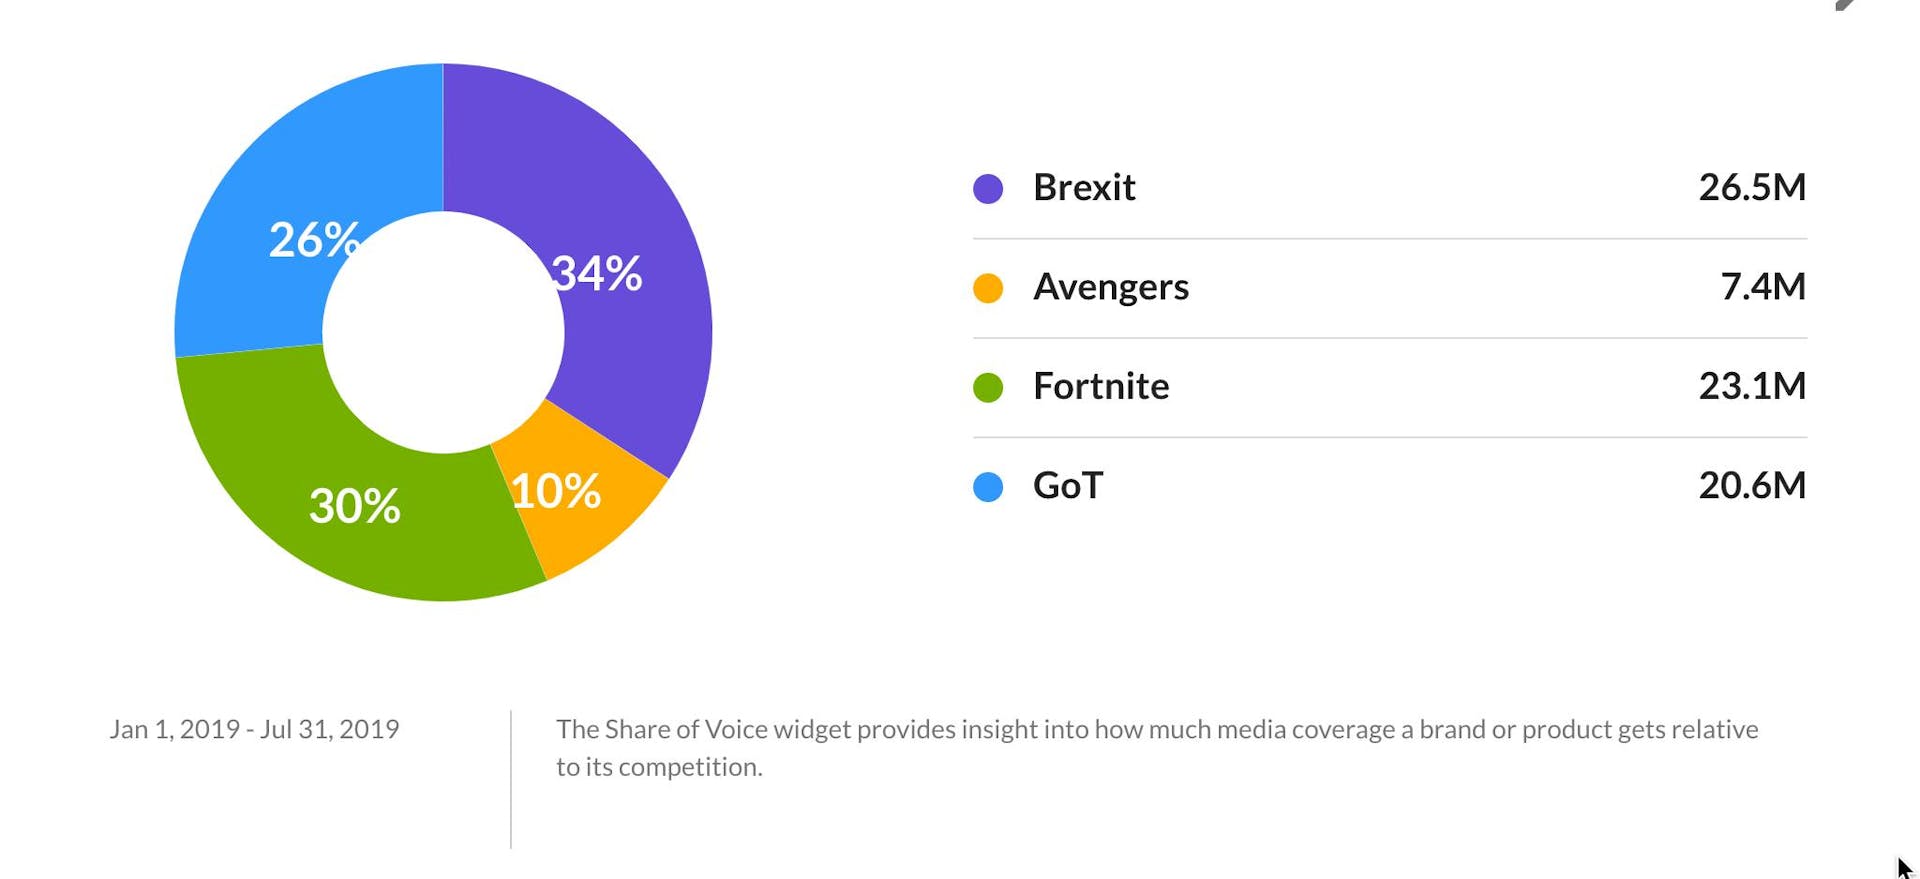 meltwater share of voice on gaming, brexit, avengers, fornite and game of thrones